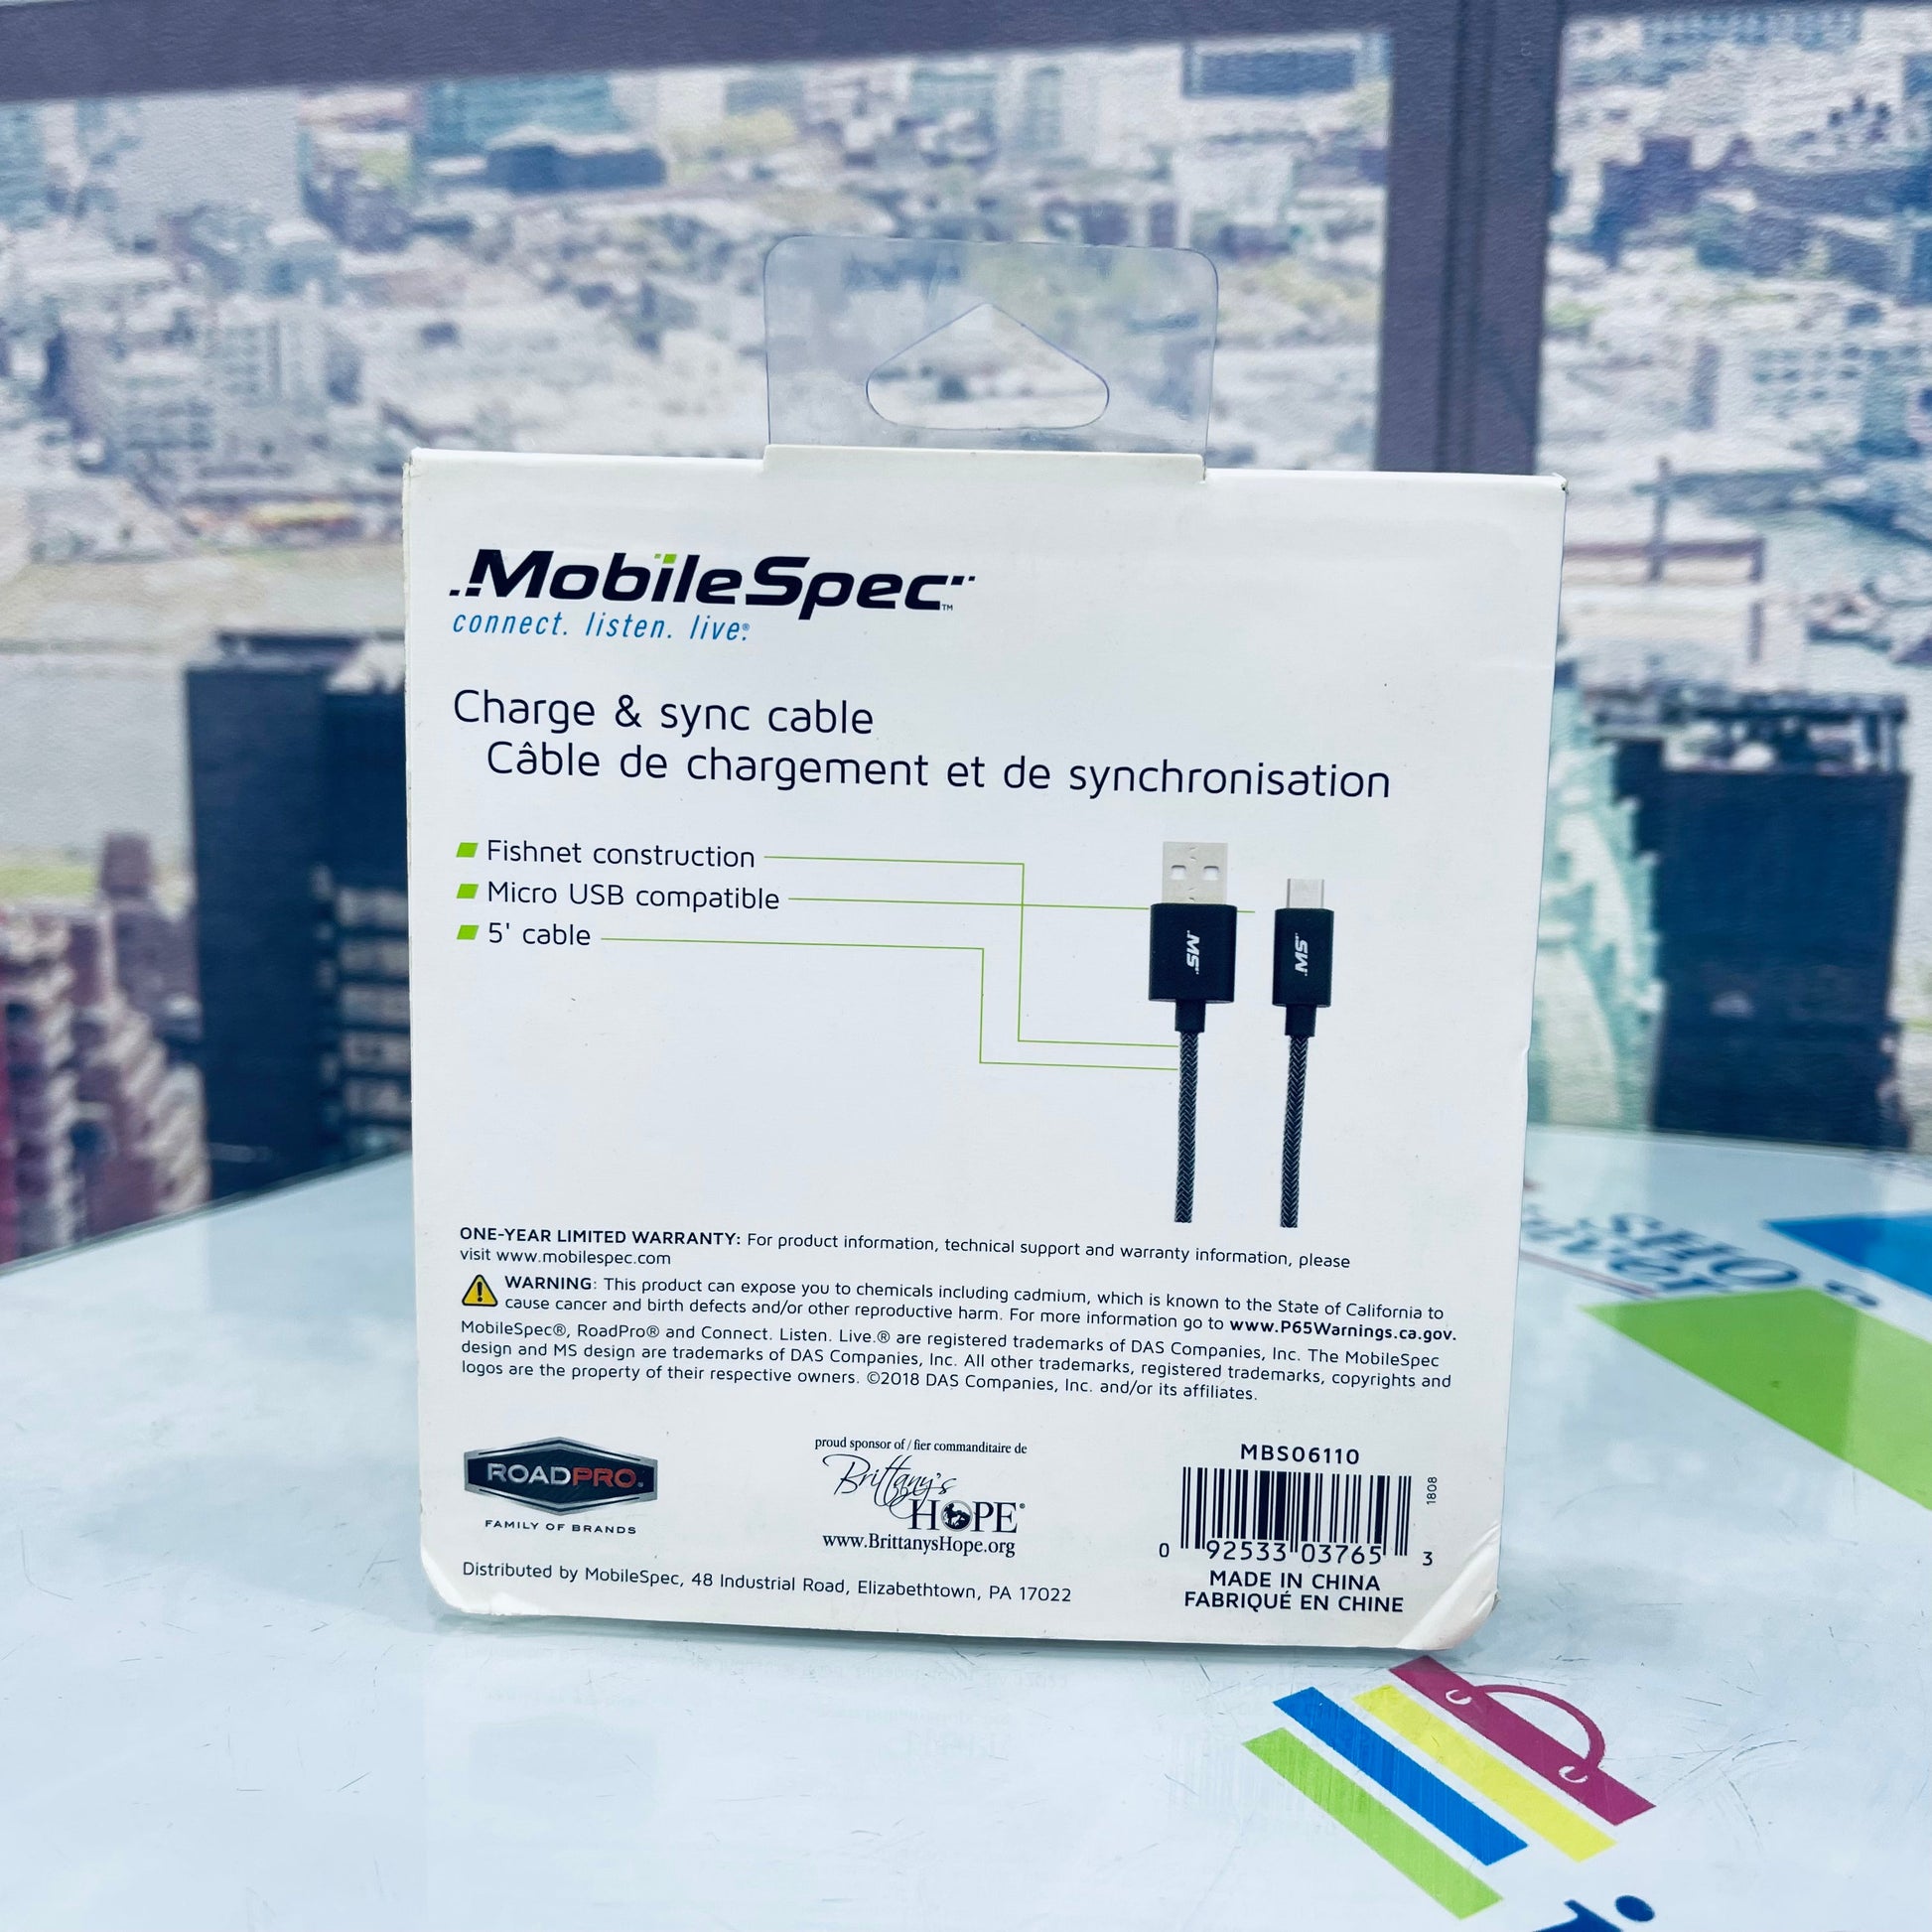 MobileSpec 5" Metallic Charge & Sync Cable SHOPINVERSE